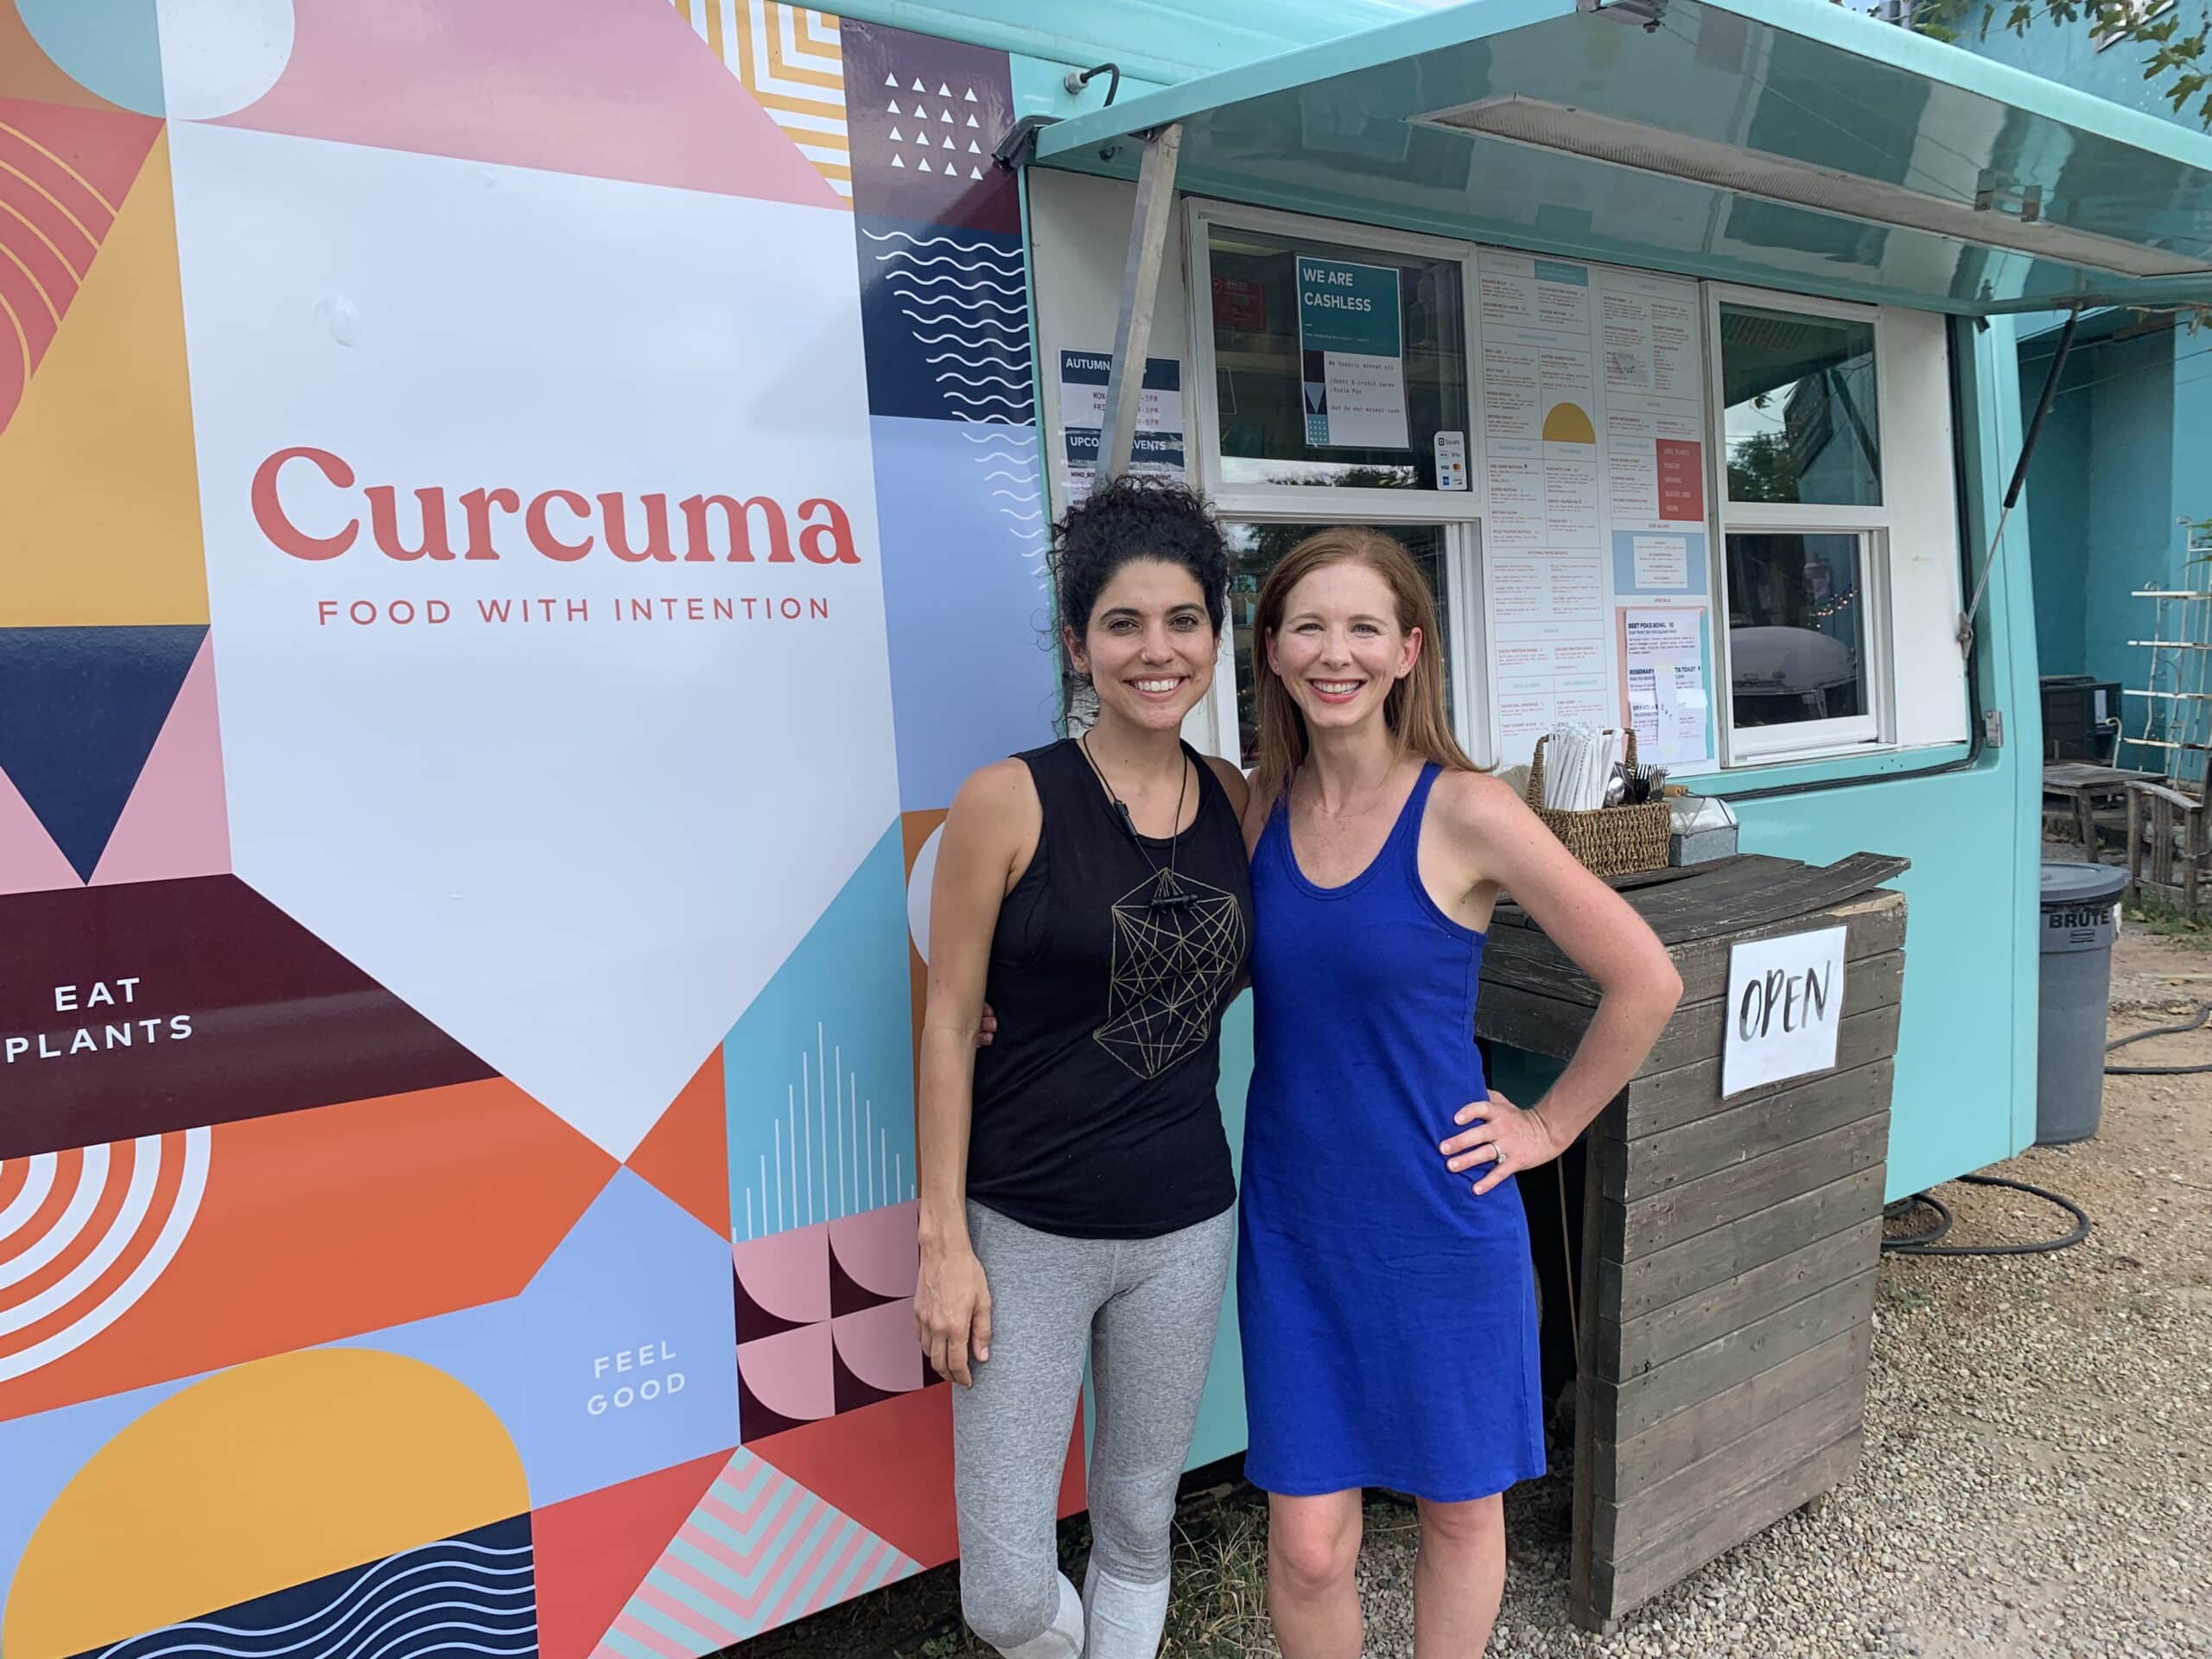 5 Healthy Food Trucks in Austin Recommended by an Expert